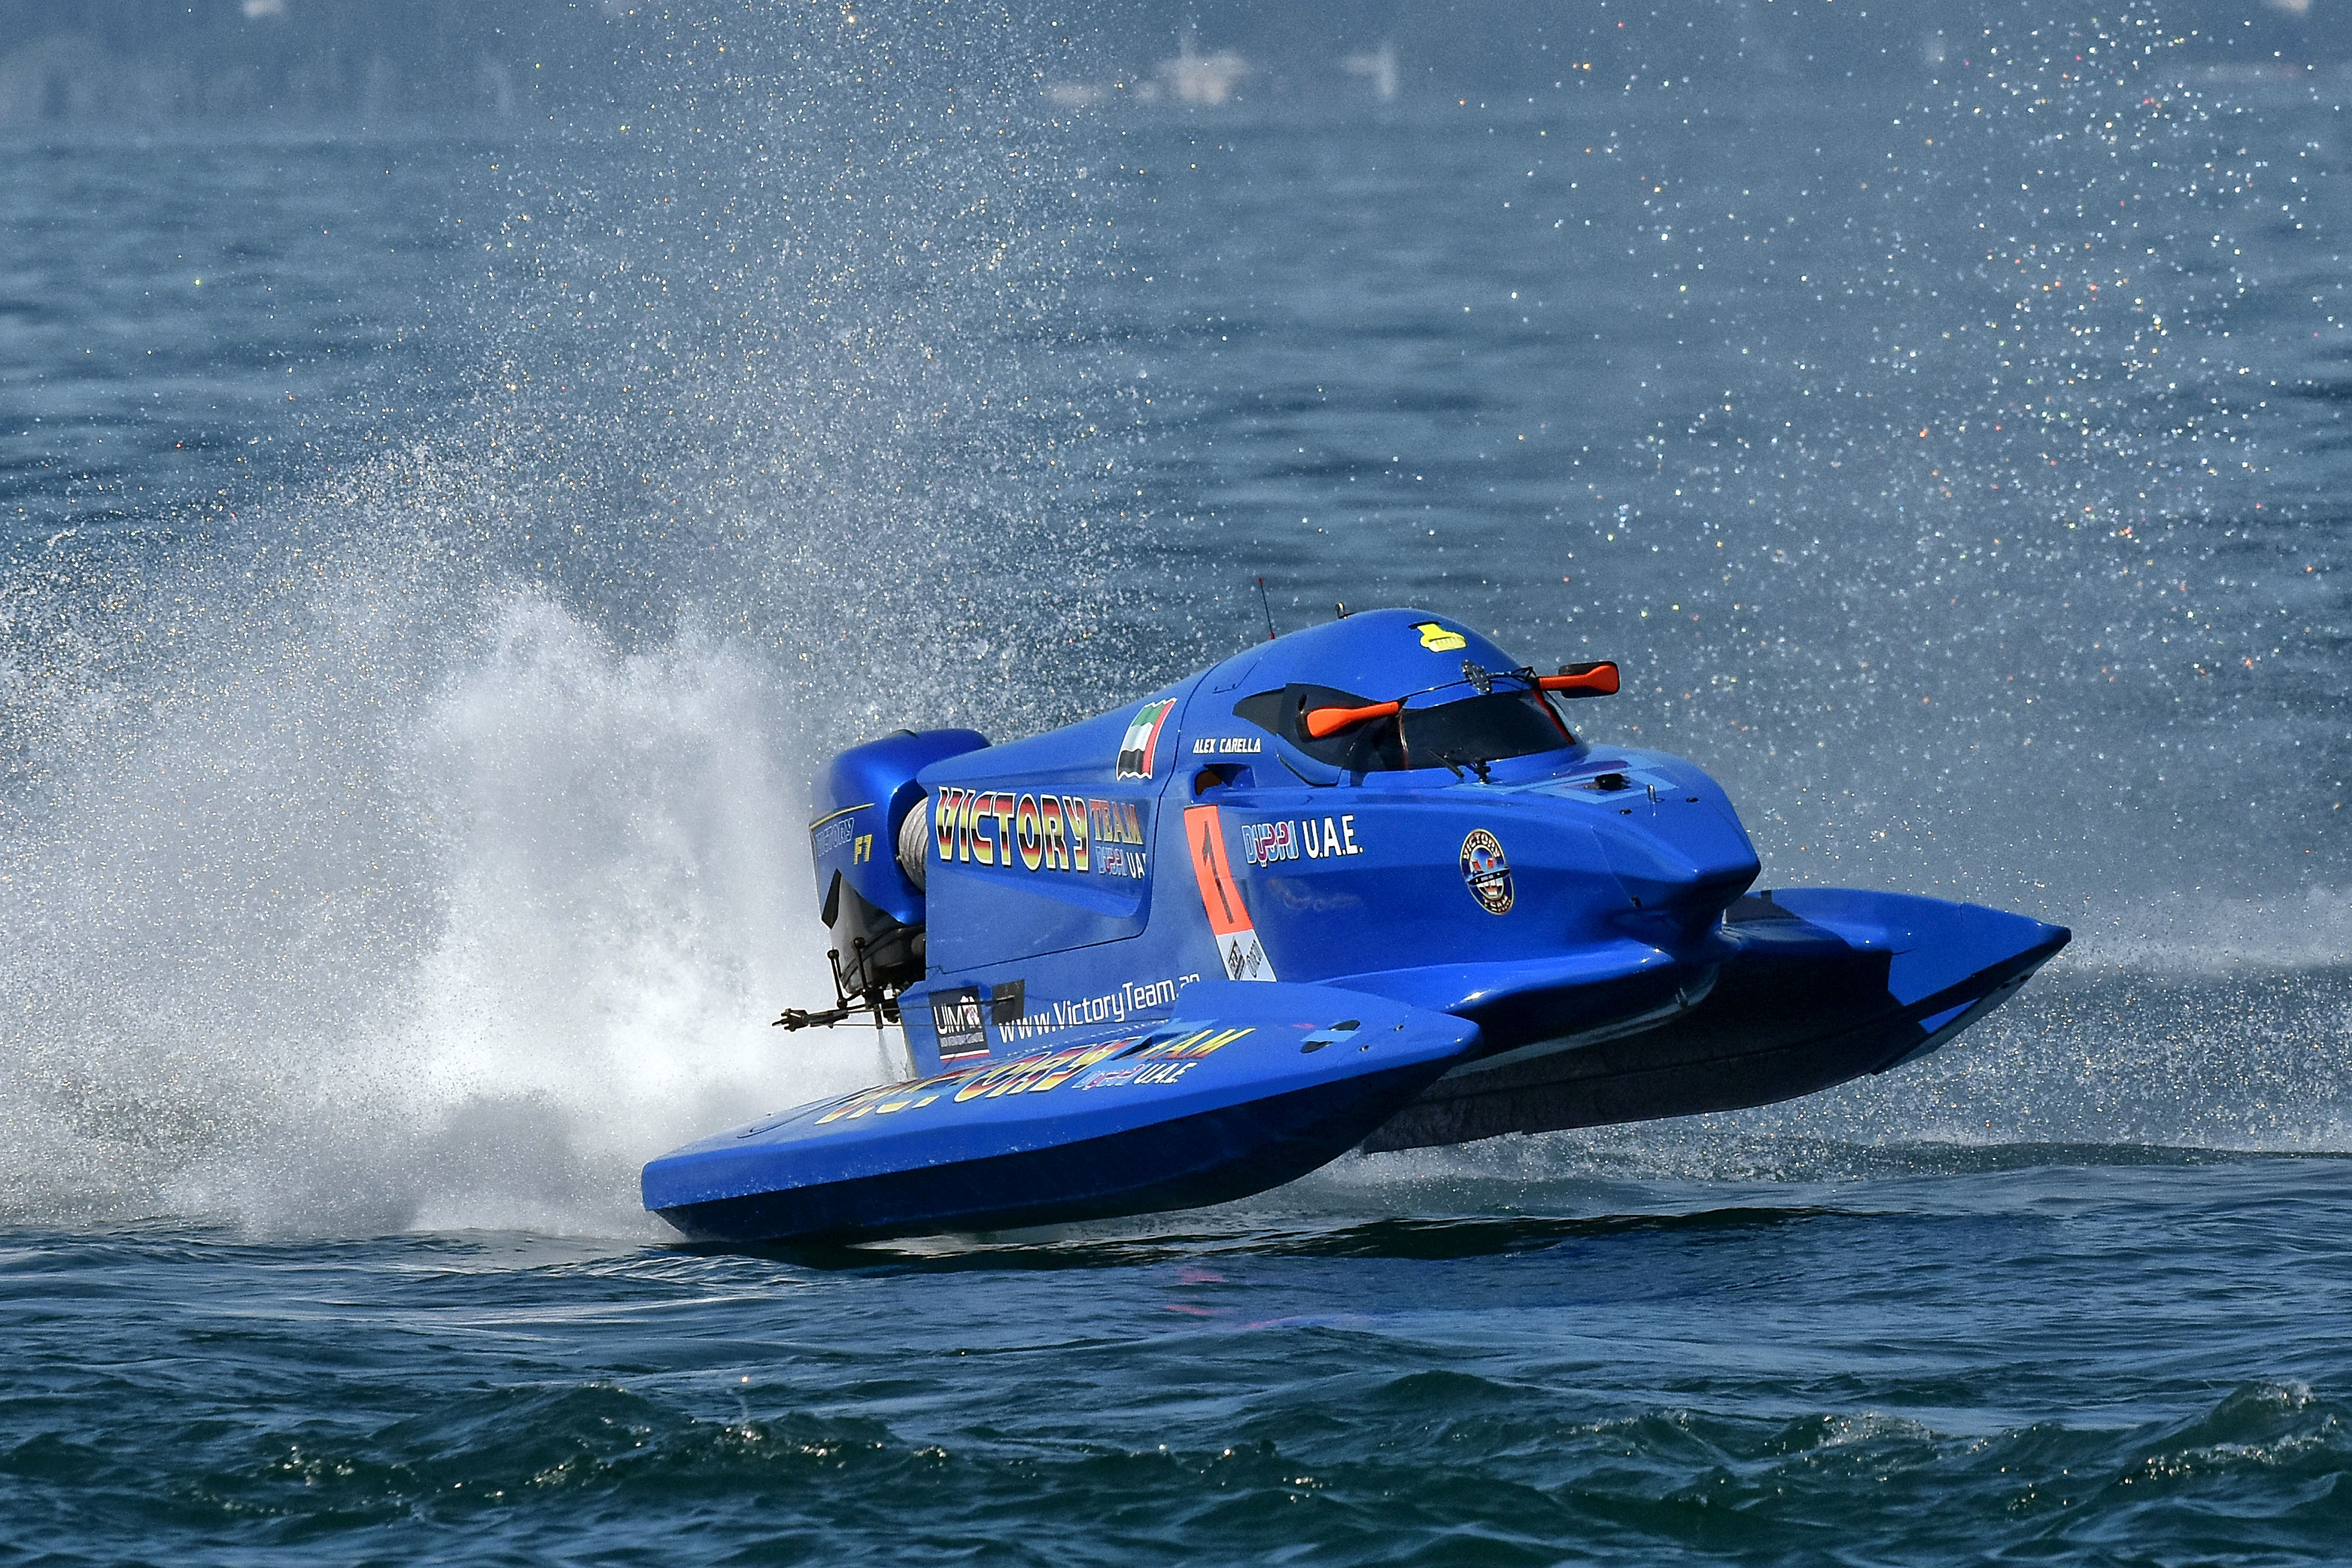 Victory Team to participate in 2023 World Powerboat Championship Formula 1